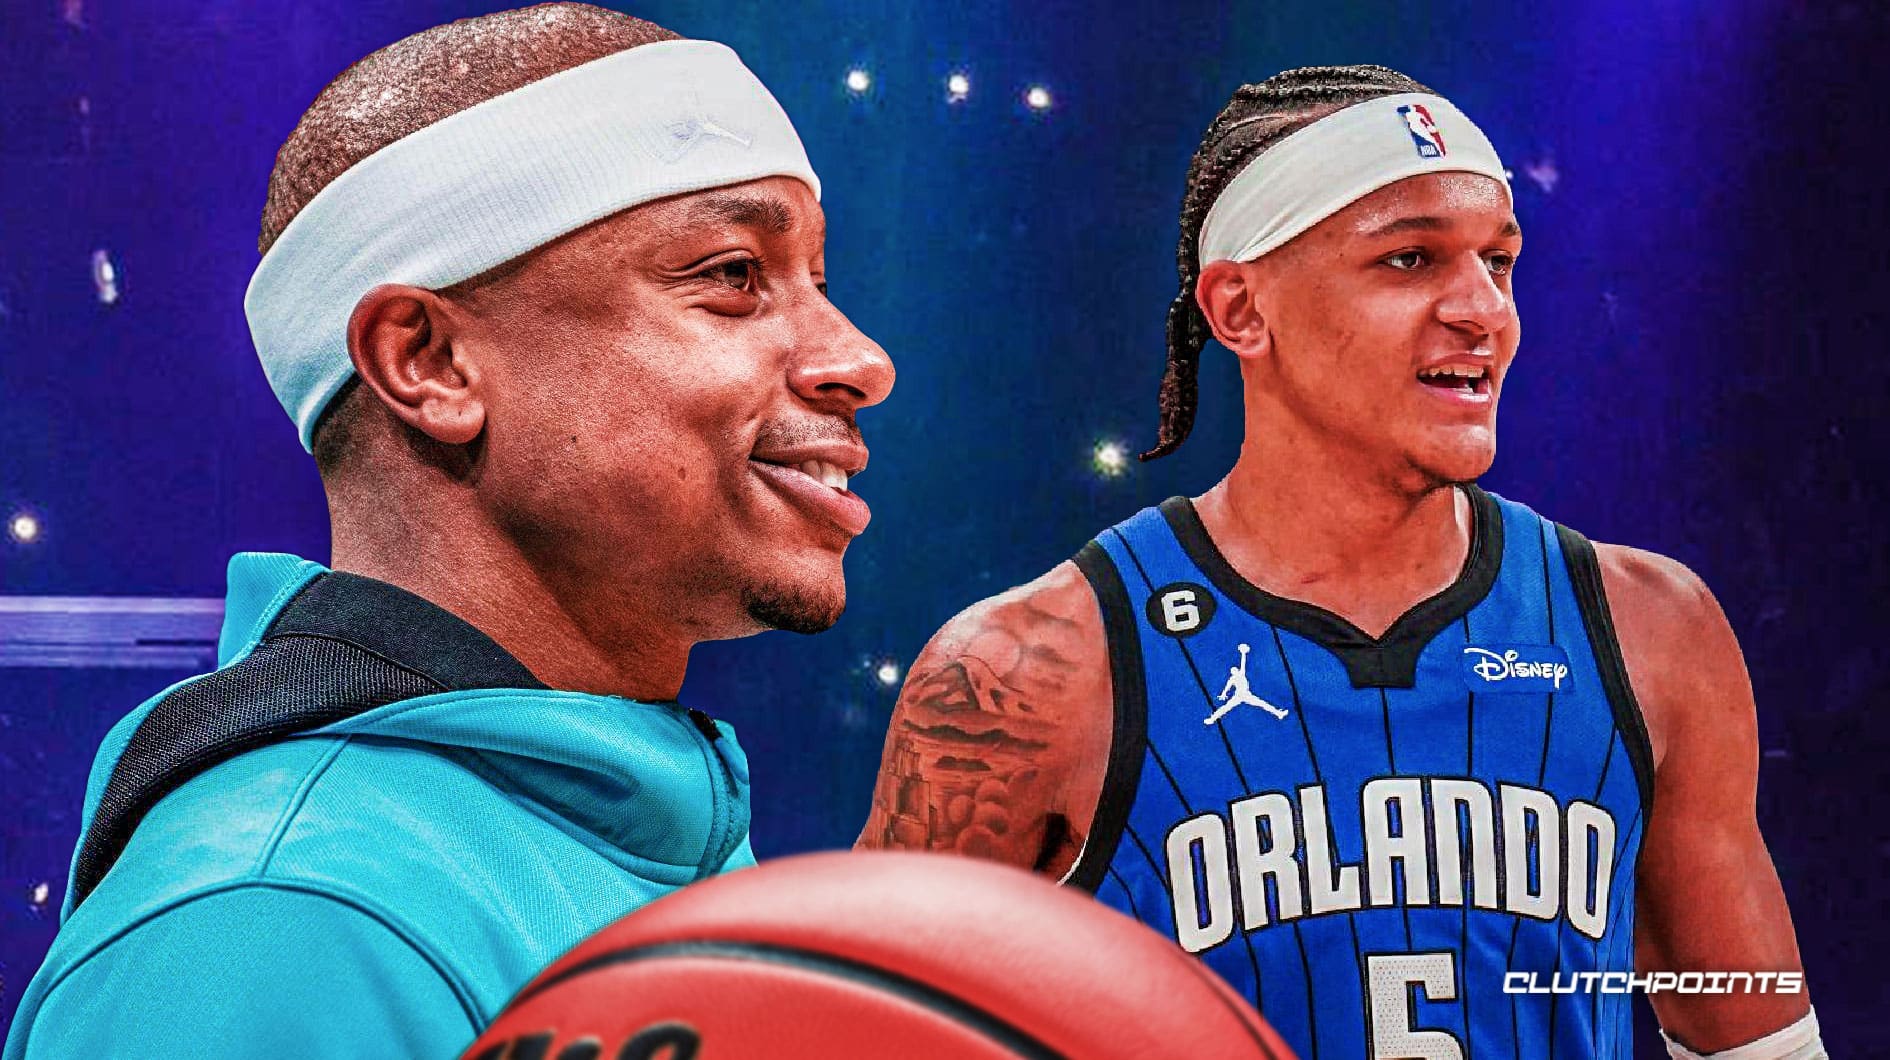 Embrace the journey': Isaiah Thomas gets real on NBA career in